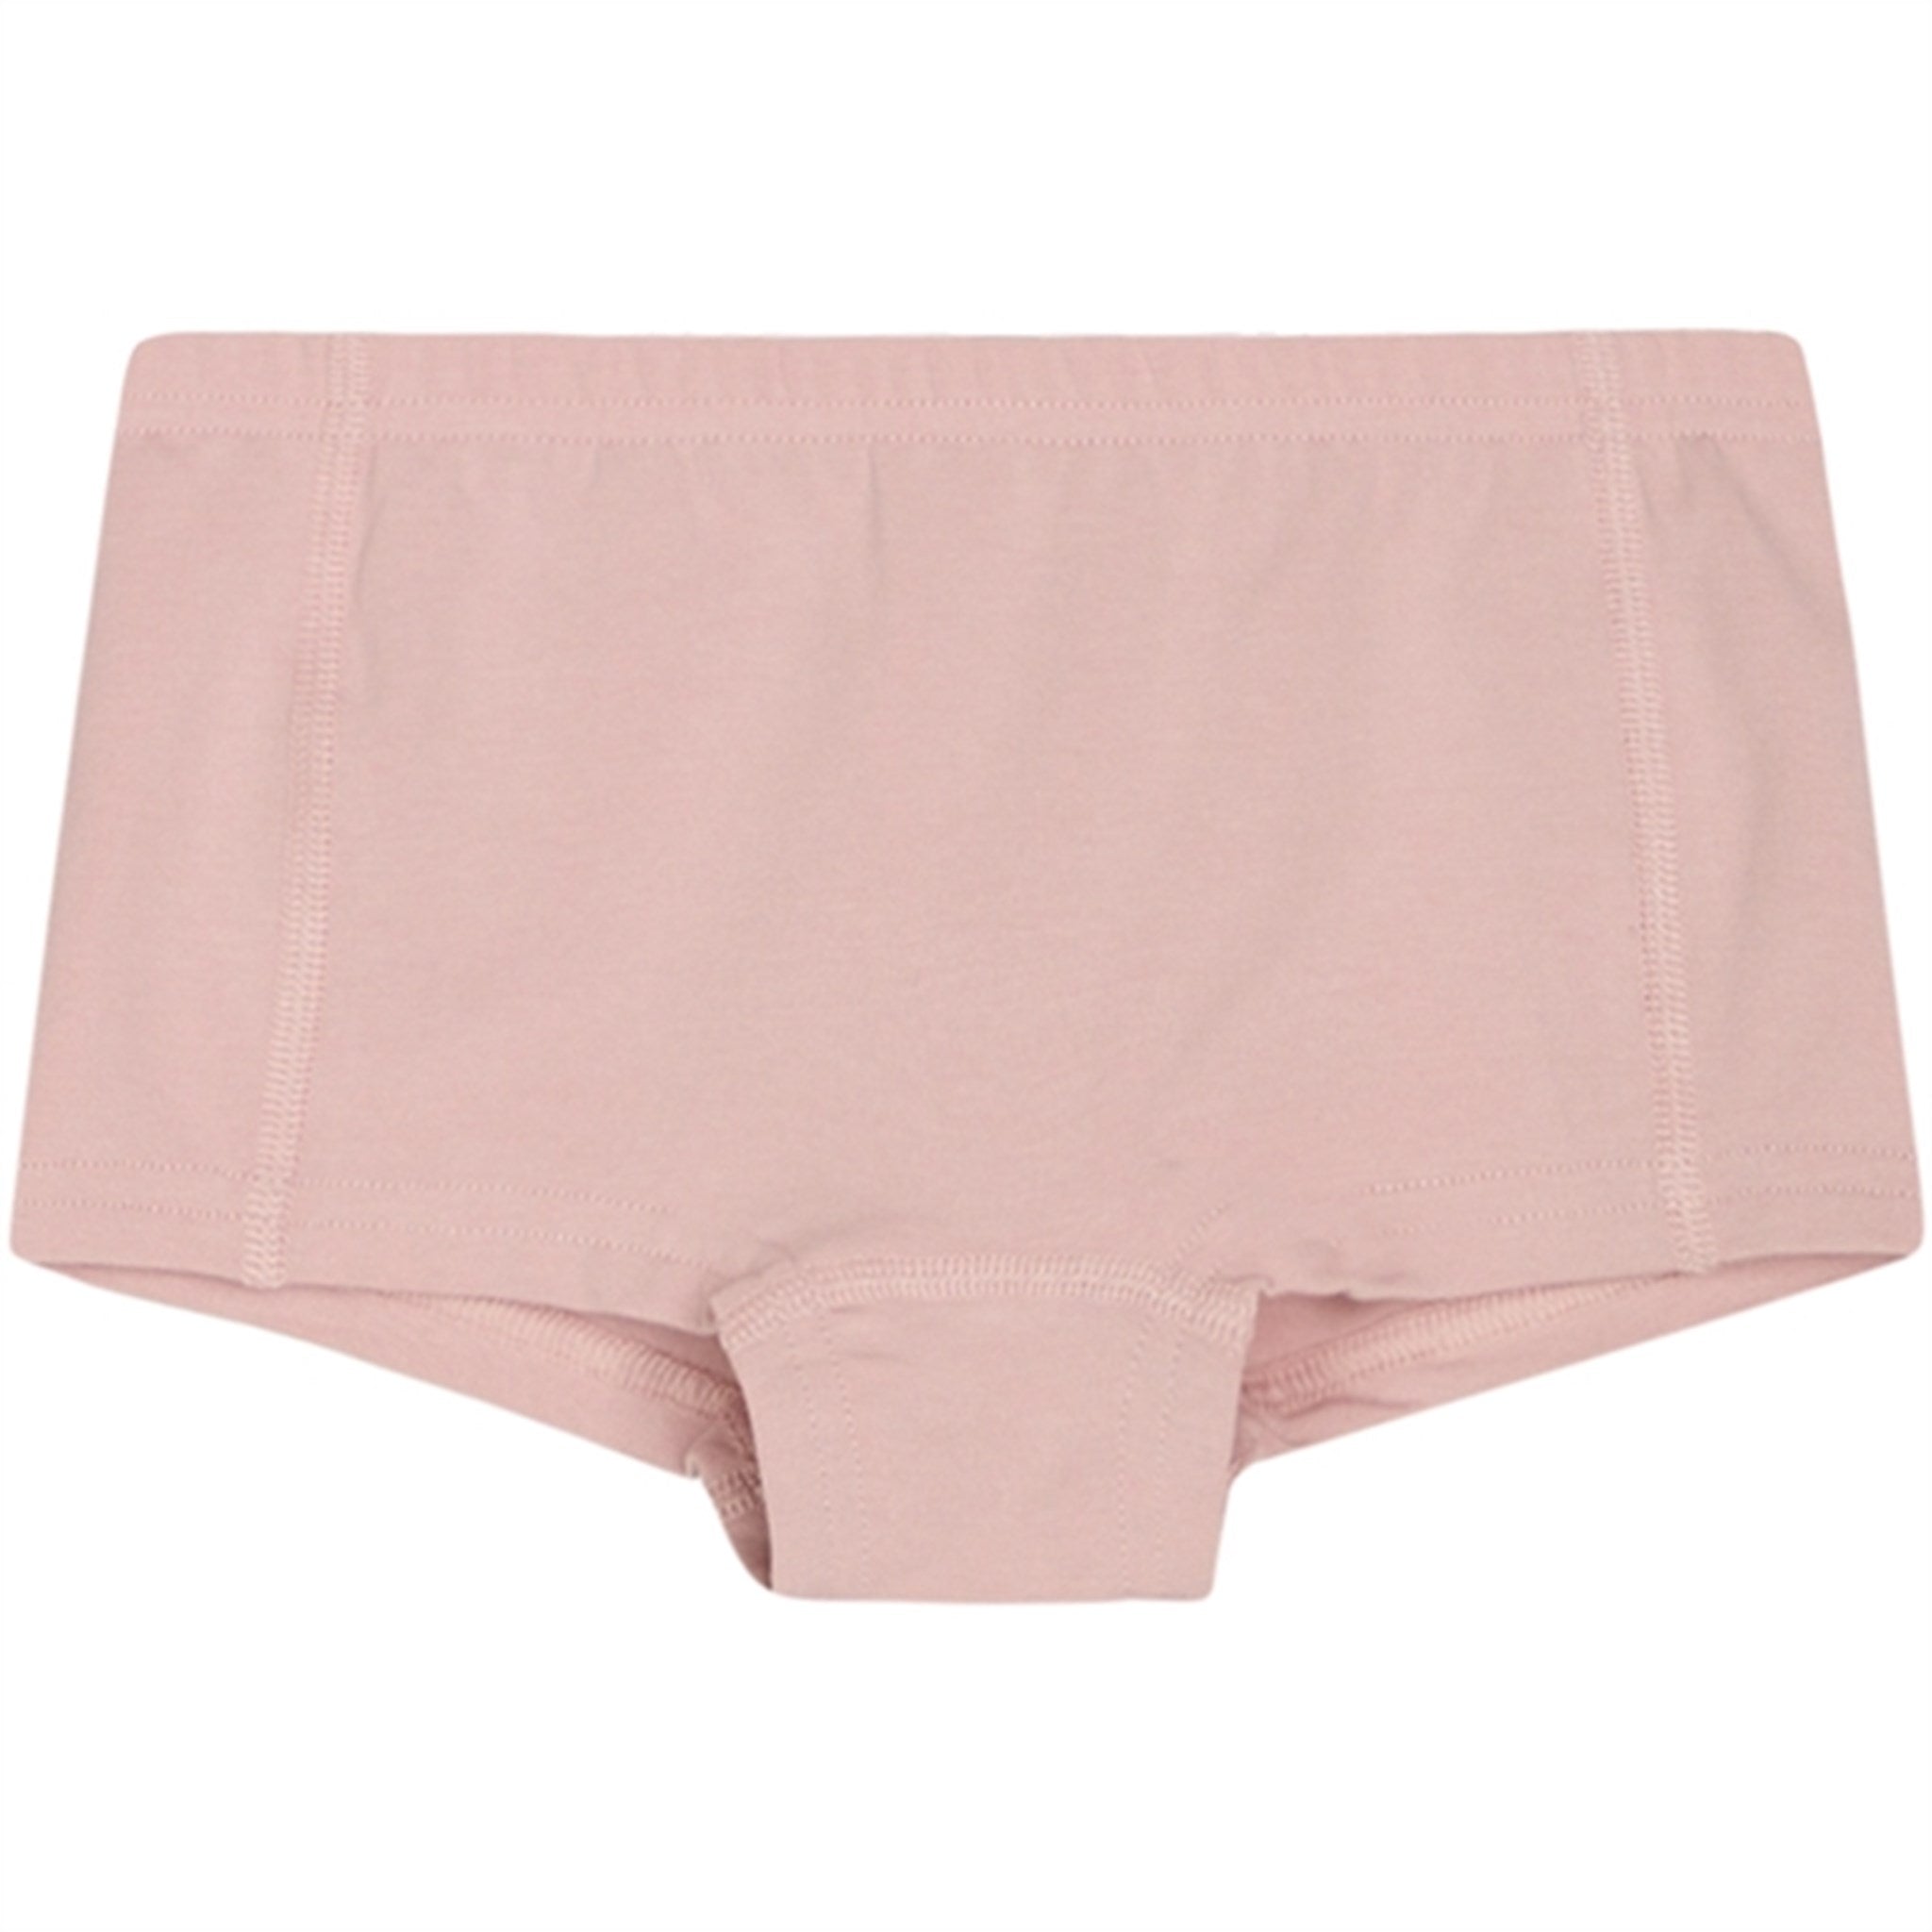 Hust & Claire Dusty Rose Fria Underwear 2-pack